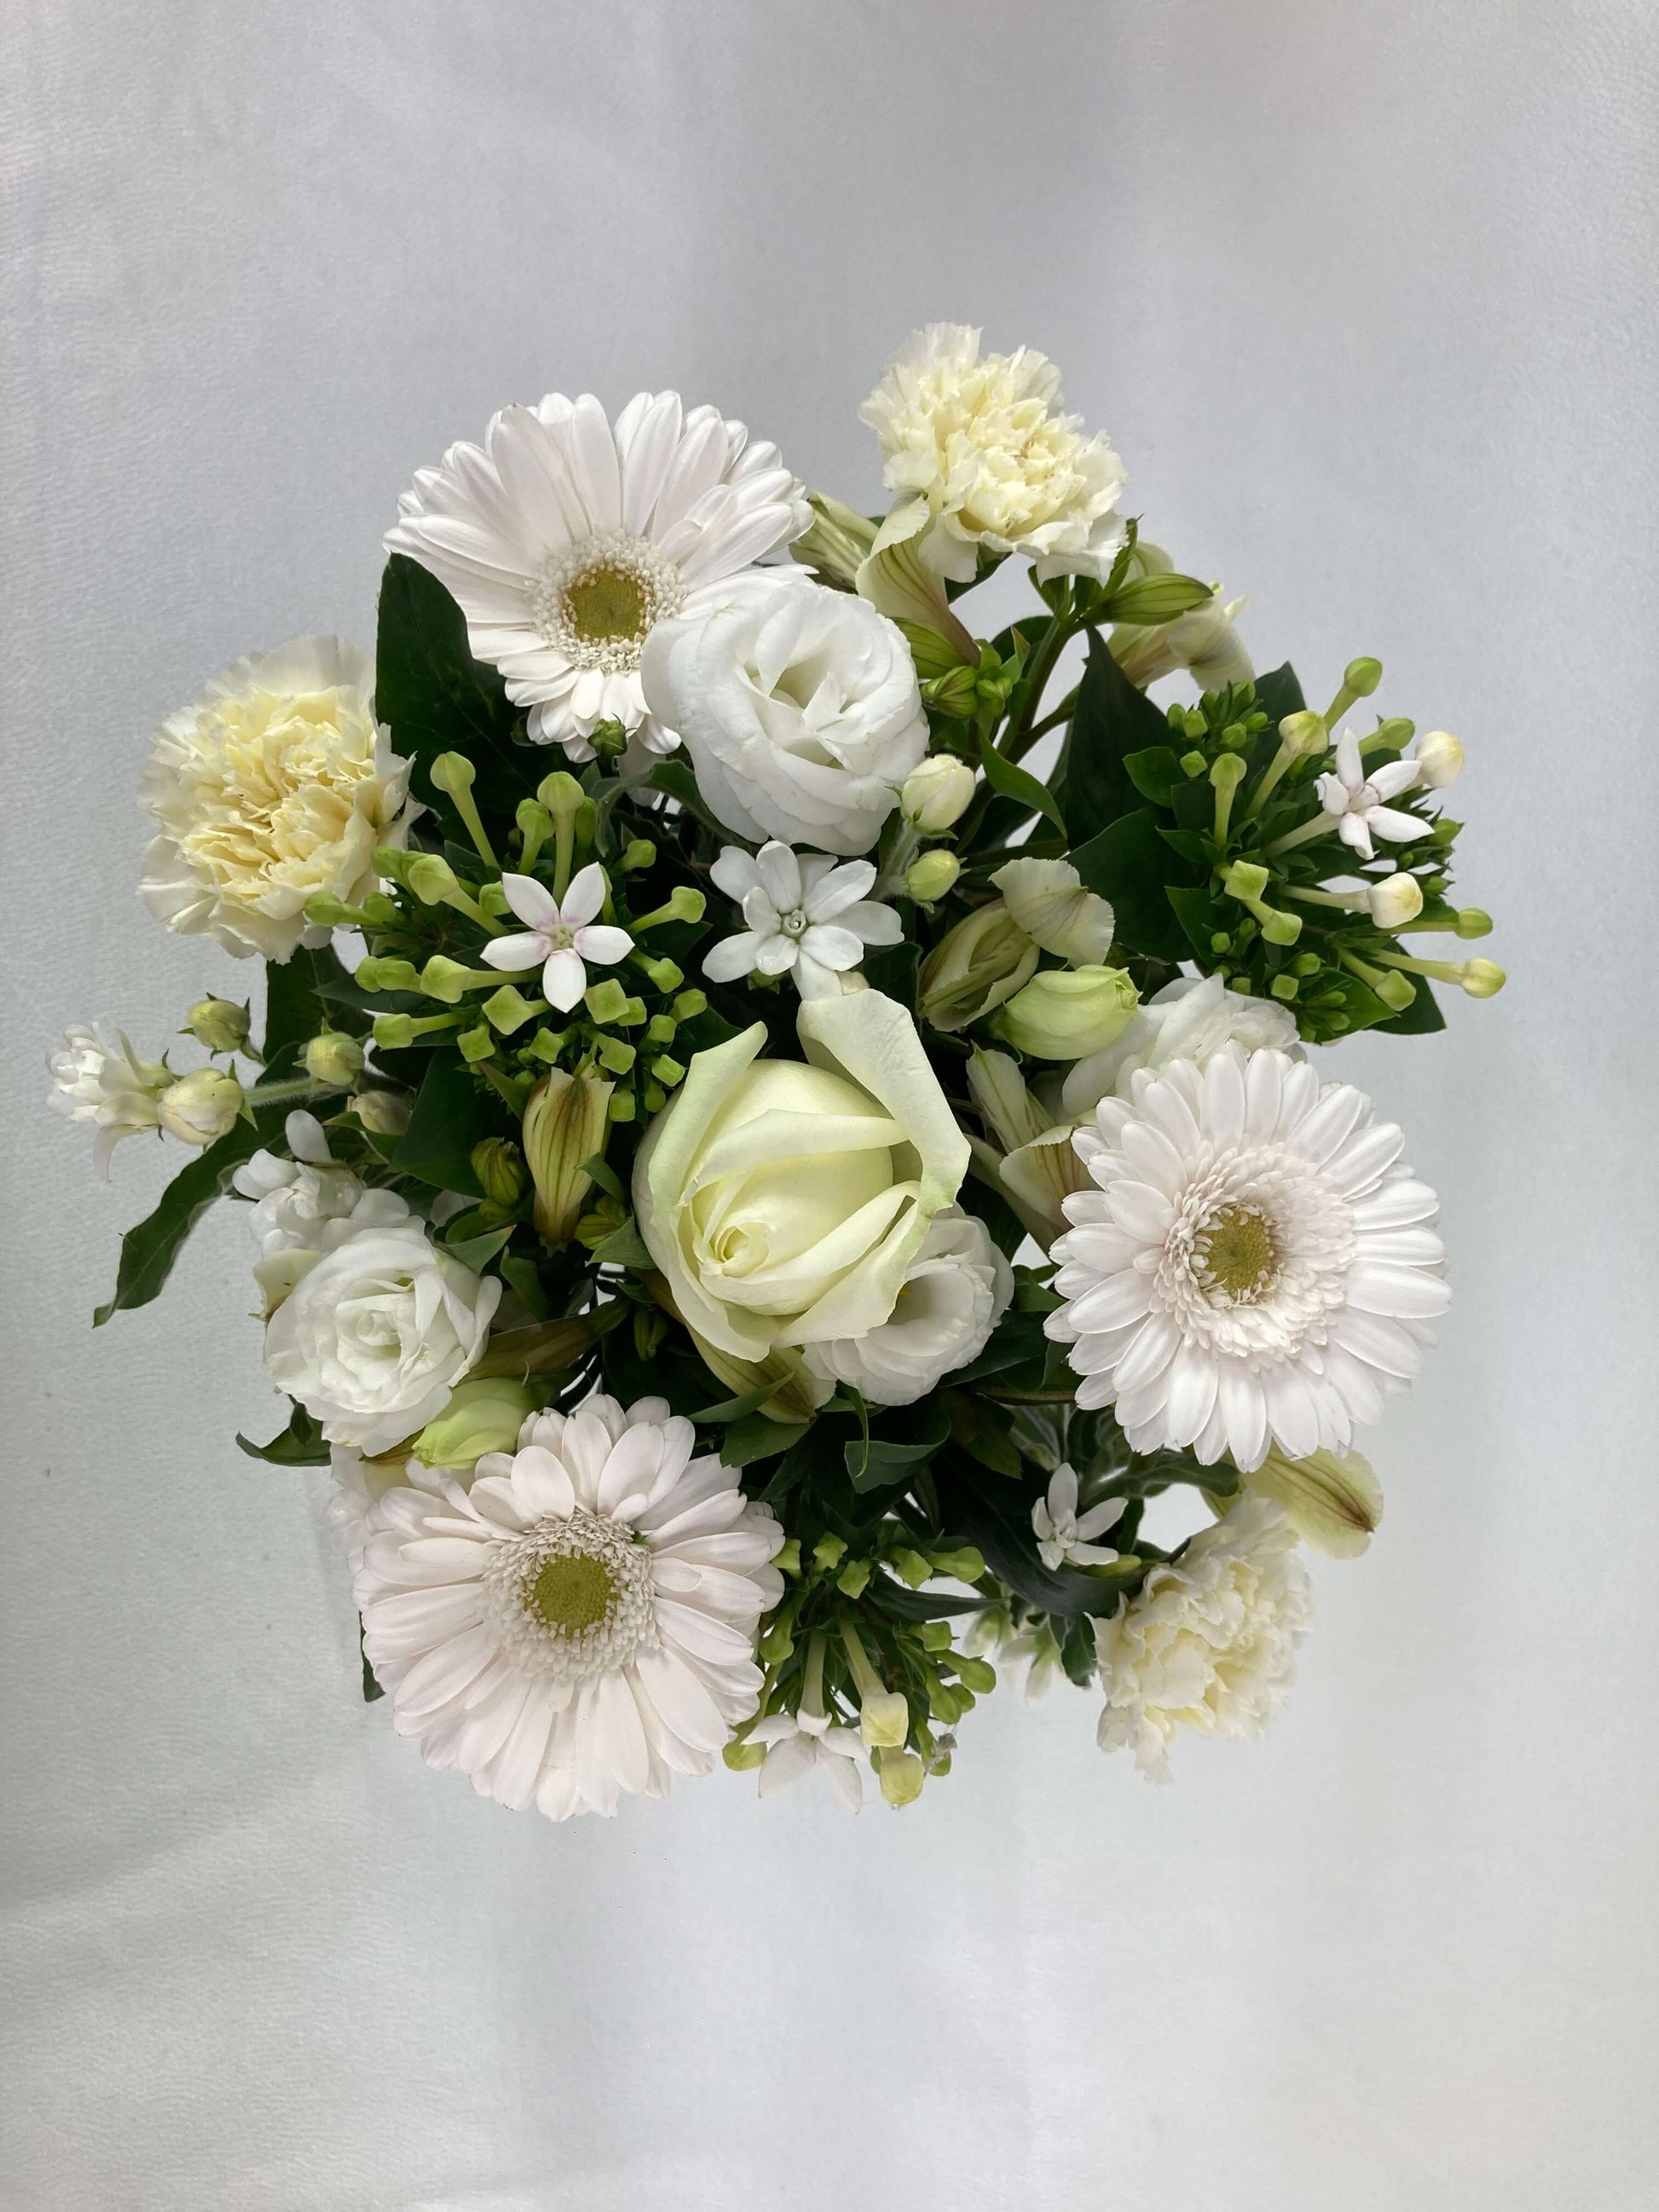 Top view looking over the short-stemmed posy flower arrangement of white and green blooms.